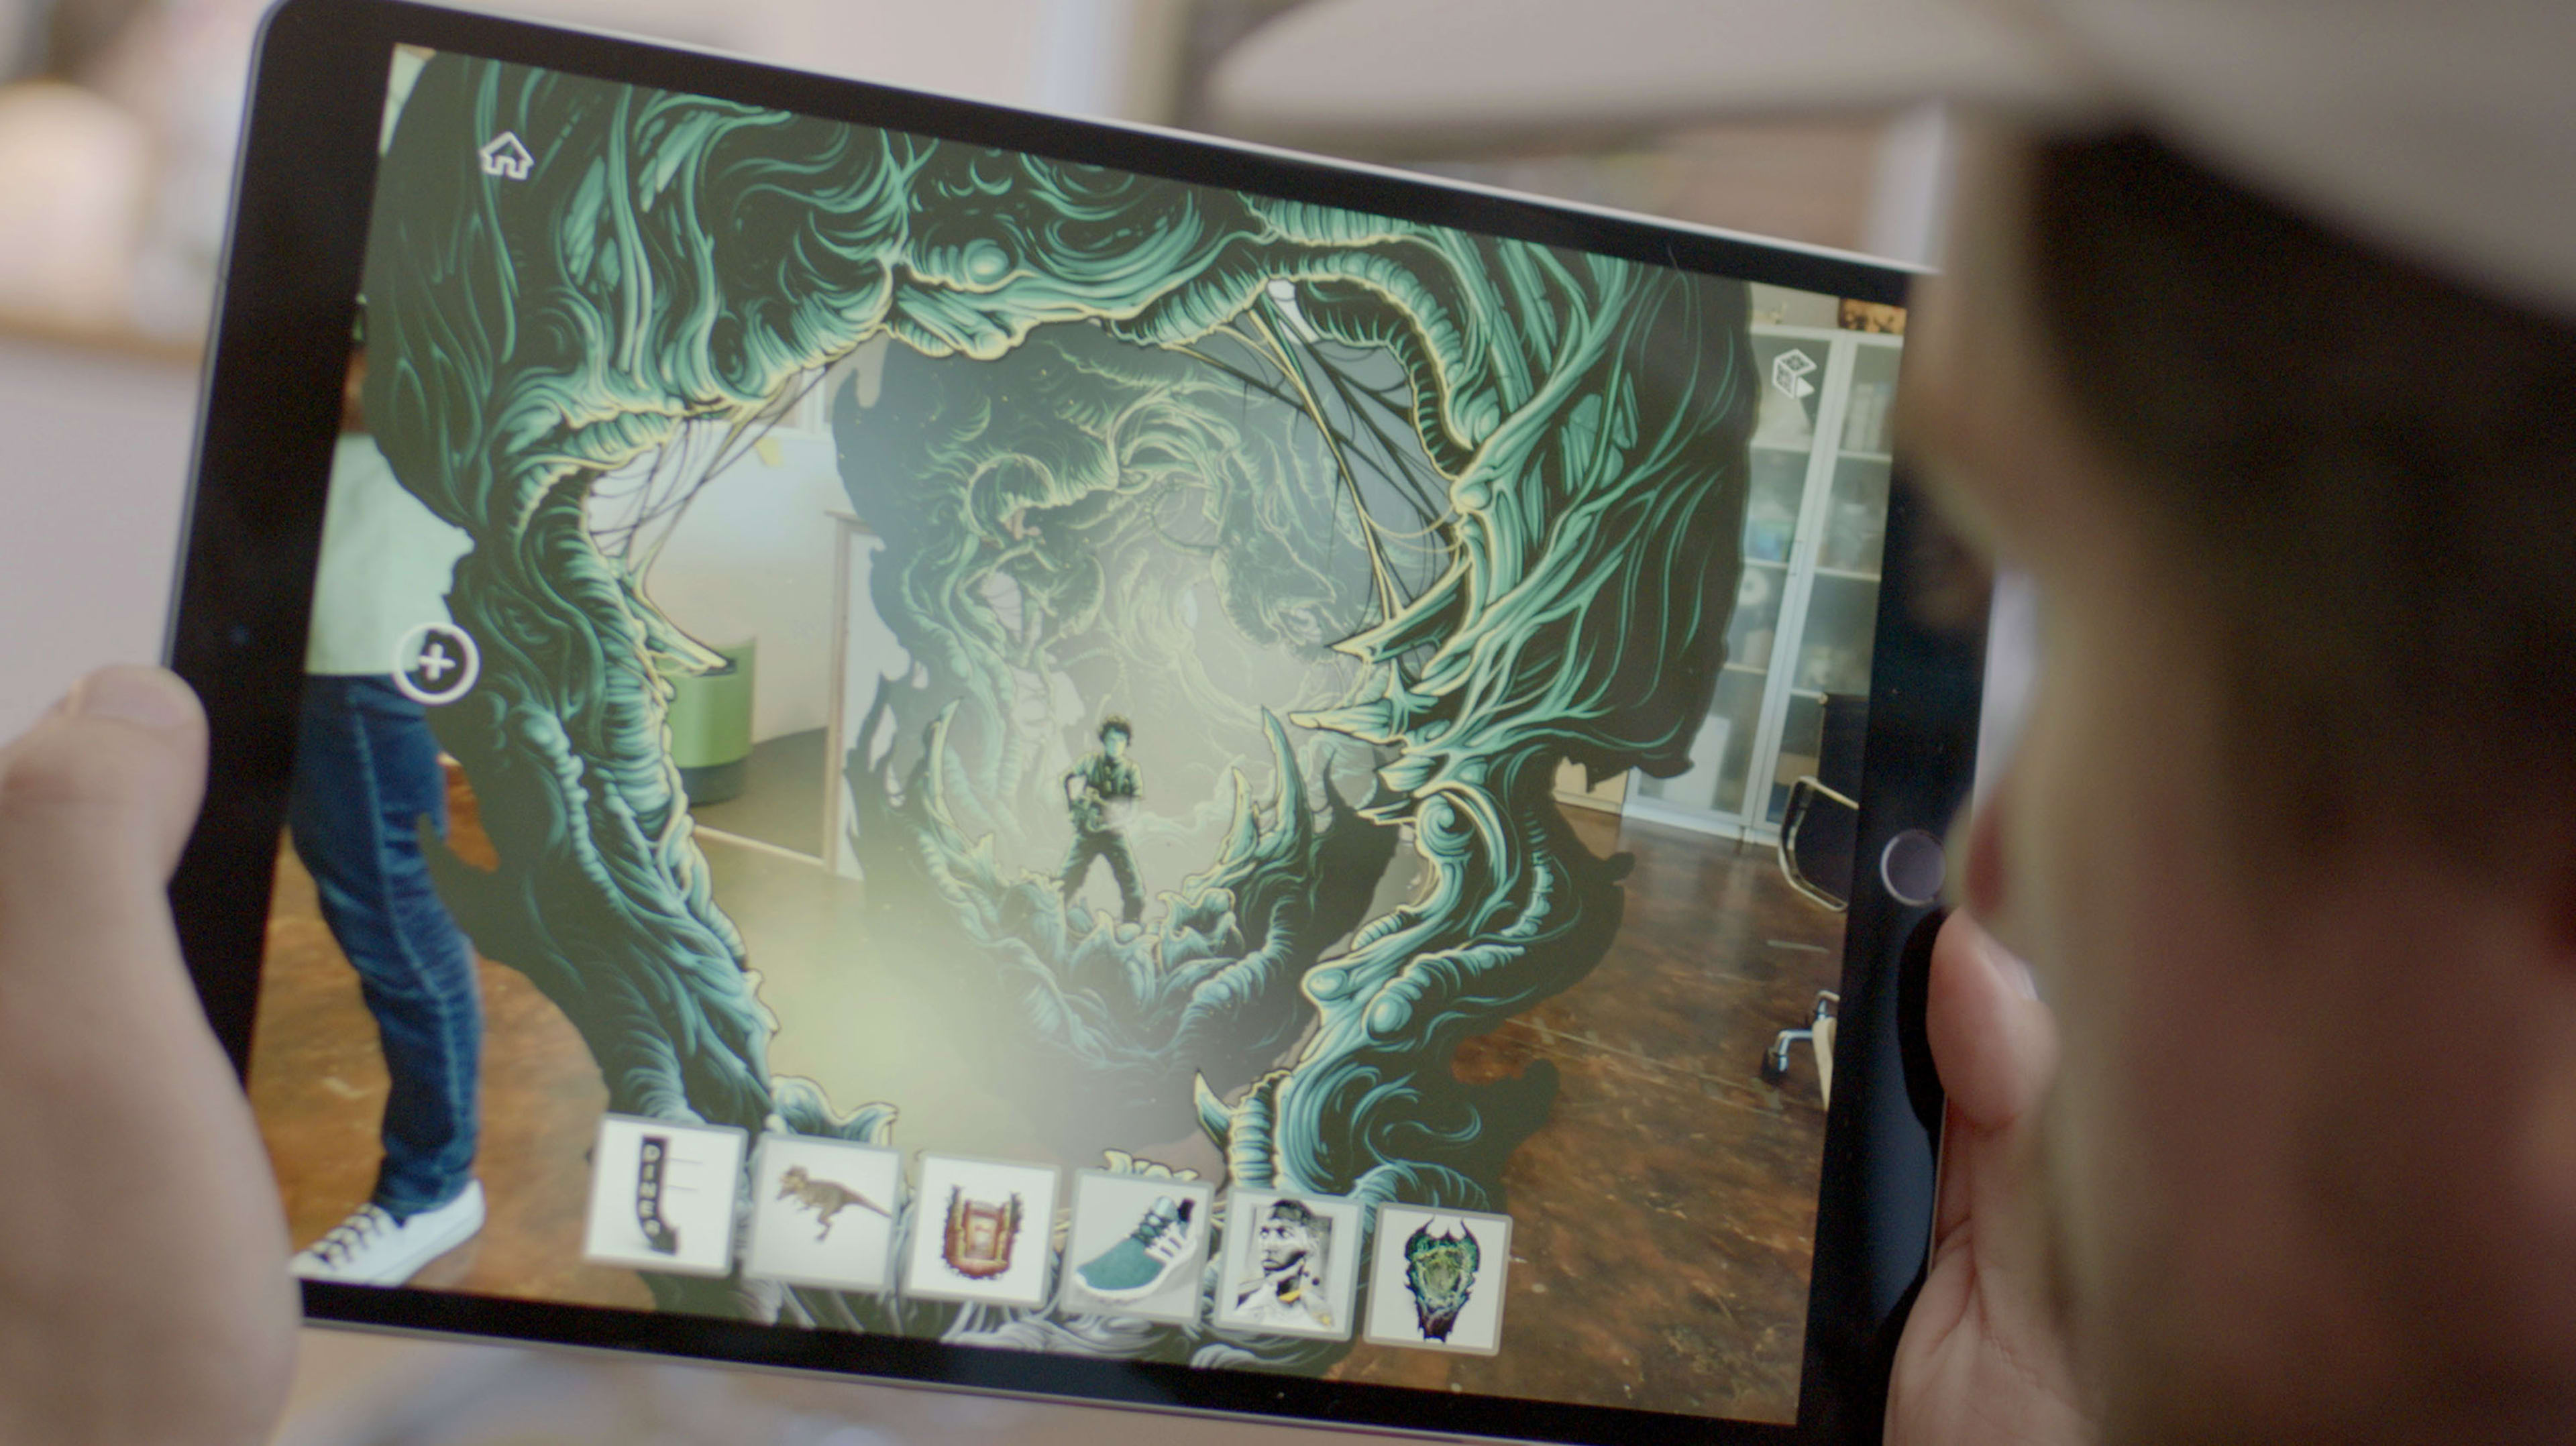 Adobe is building the Photoshop for AR (it’s called Photoshop)